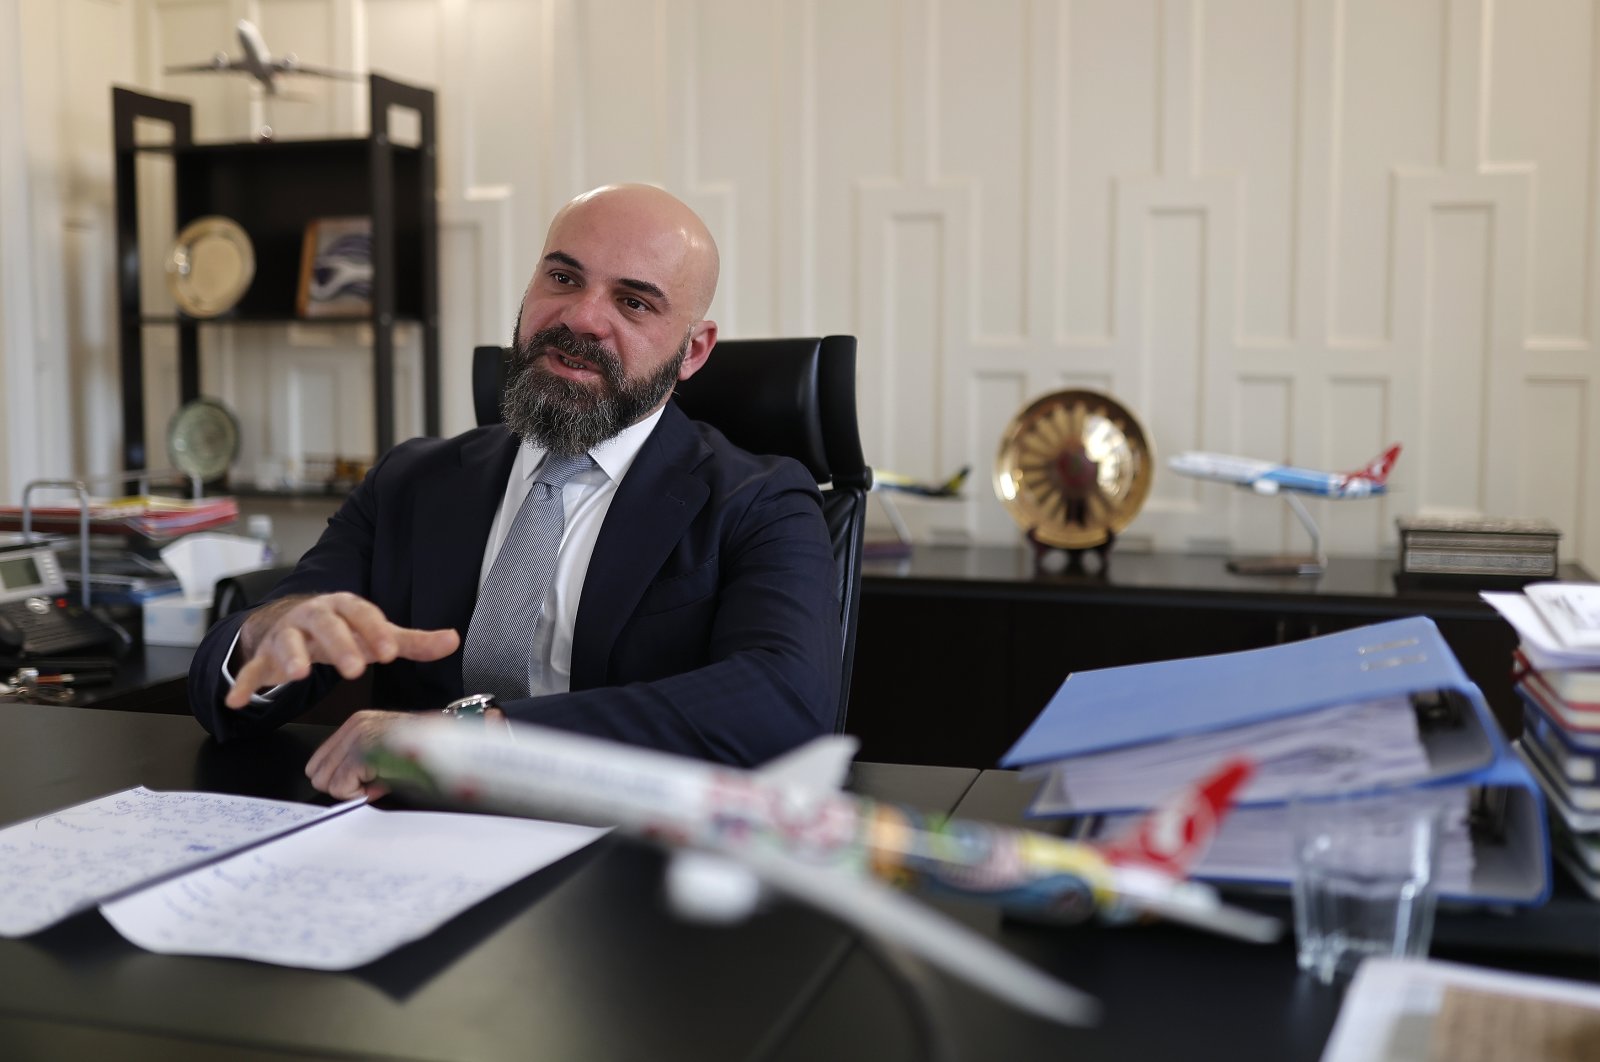 Numan Çizmecioğlu, general manager of national flag carrier Turkish Airlines (THY) in Madrid speaks to Anadolu Agency in this photo released on Dec. 24, 2022. (AA Photo)